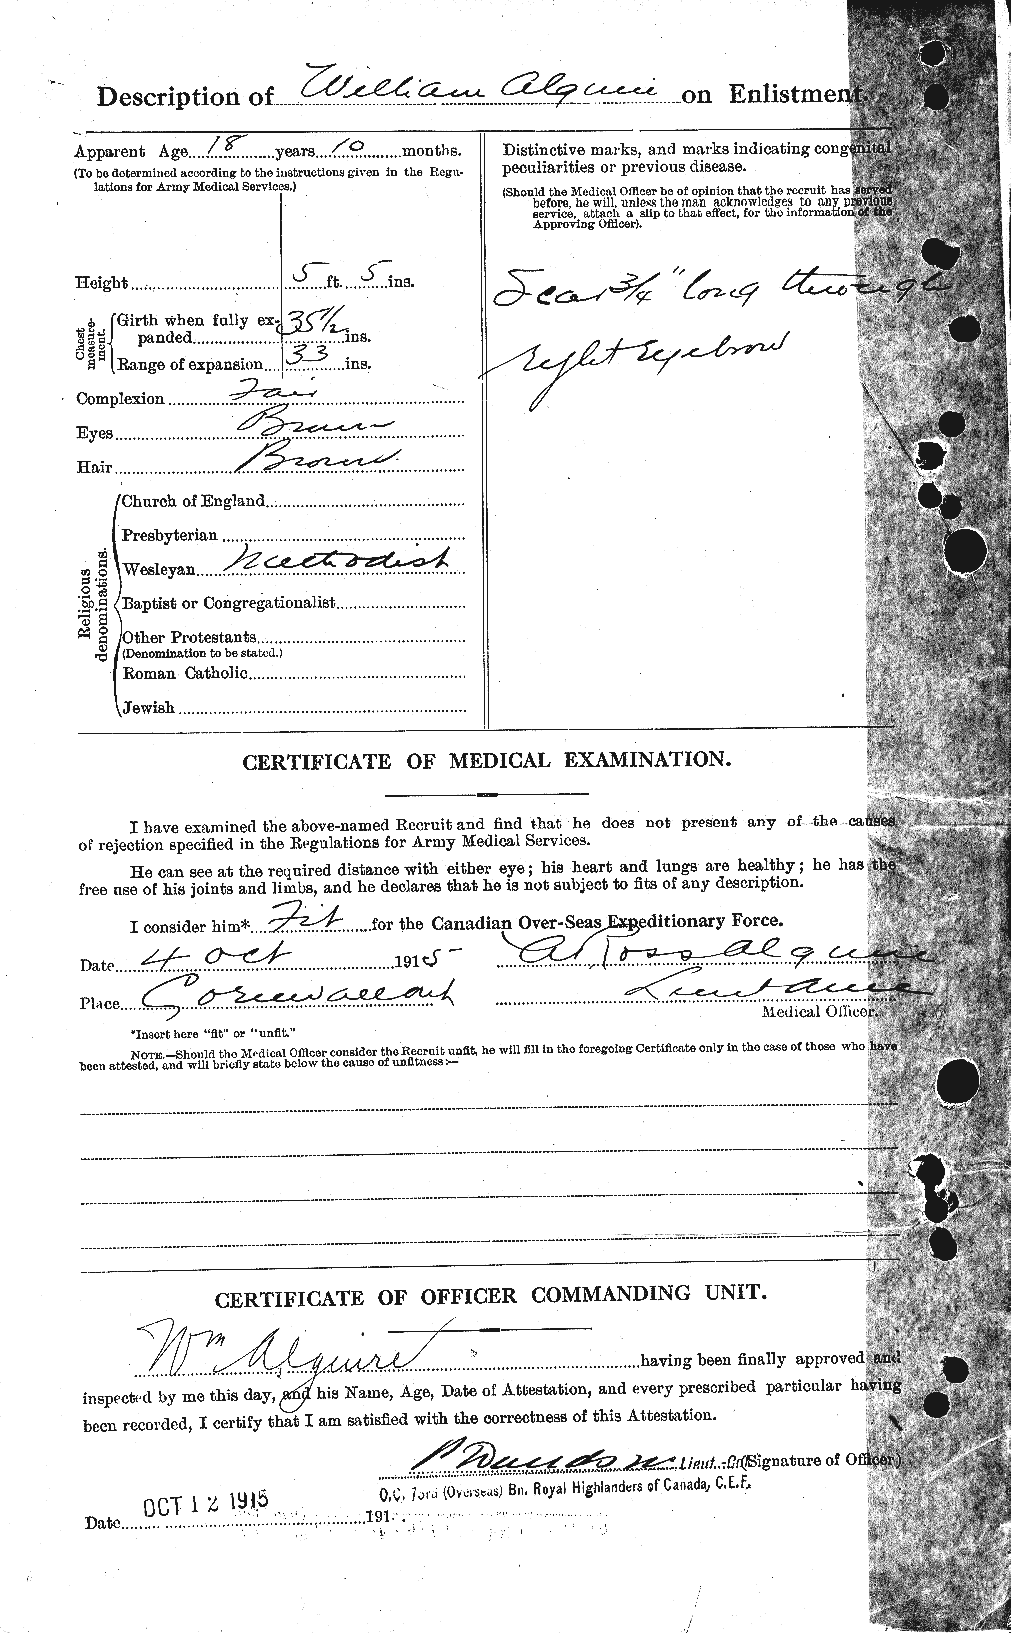 Personnel Records of the First World War - CEF 205085b